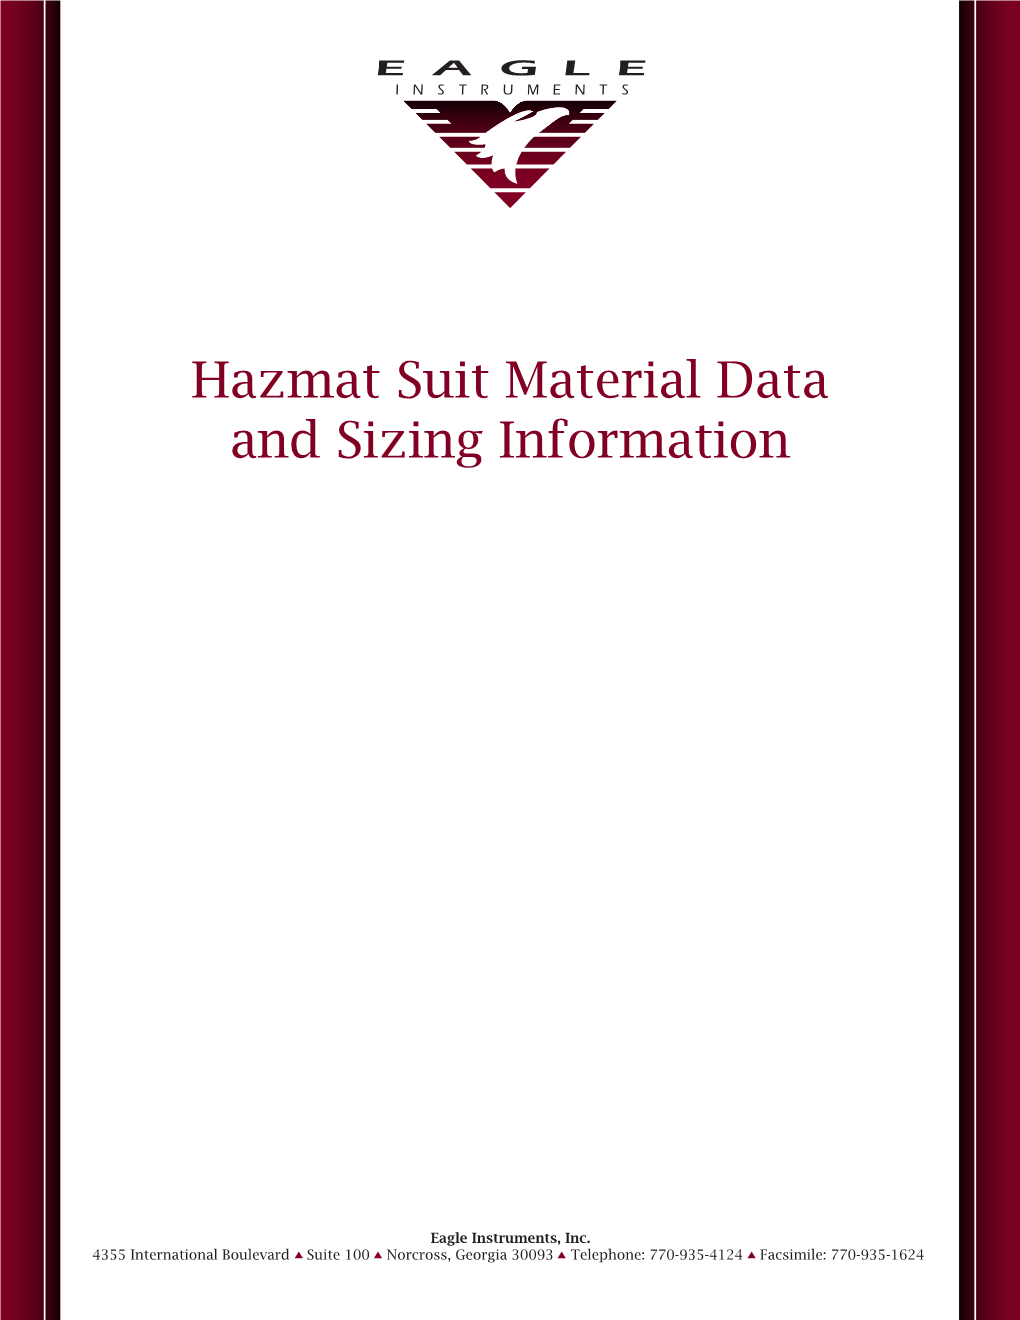 Hazmat Suit Material Data and Sizing Information